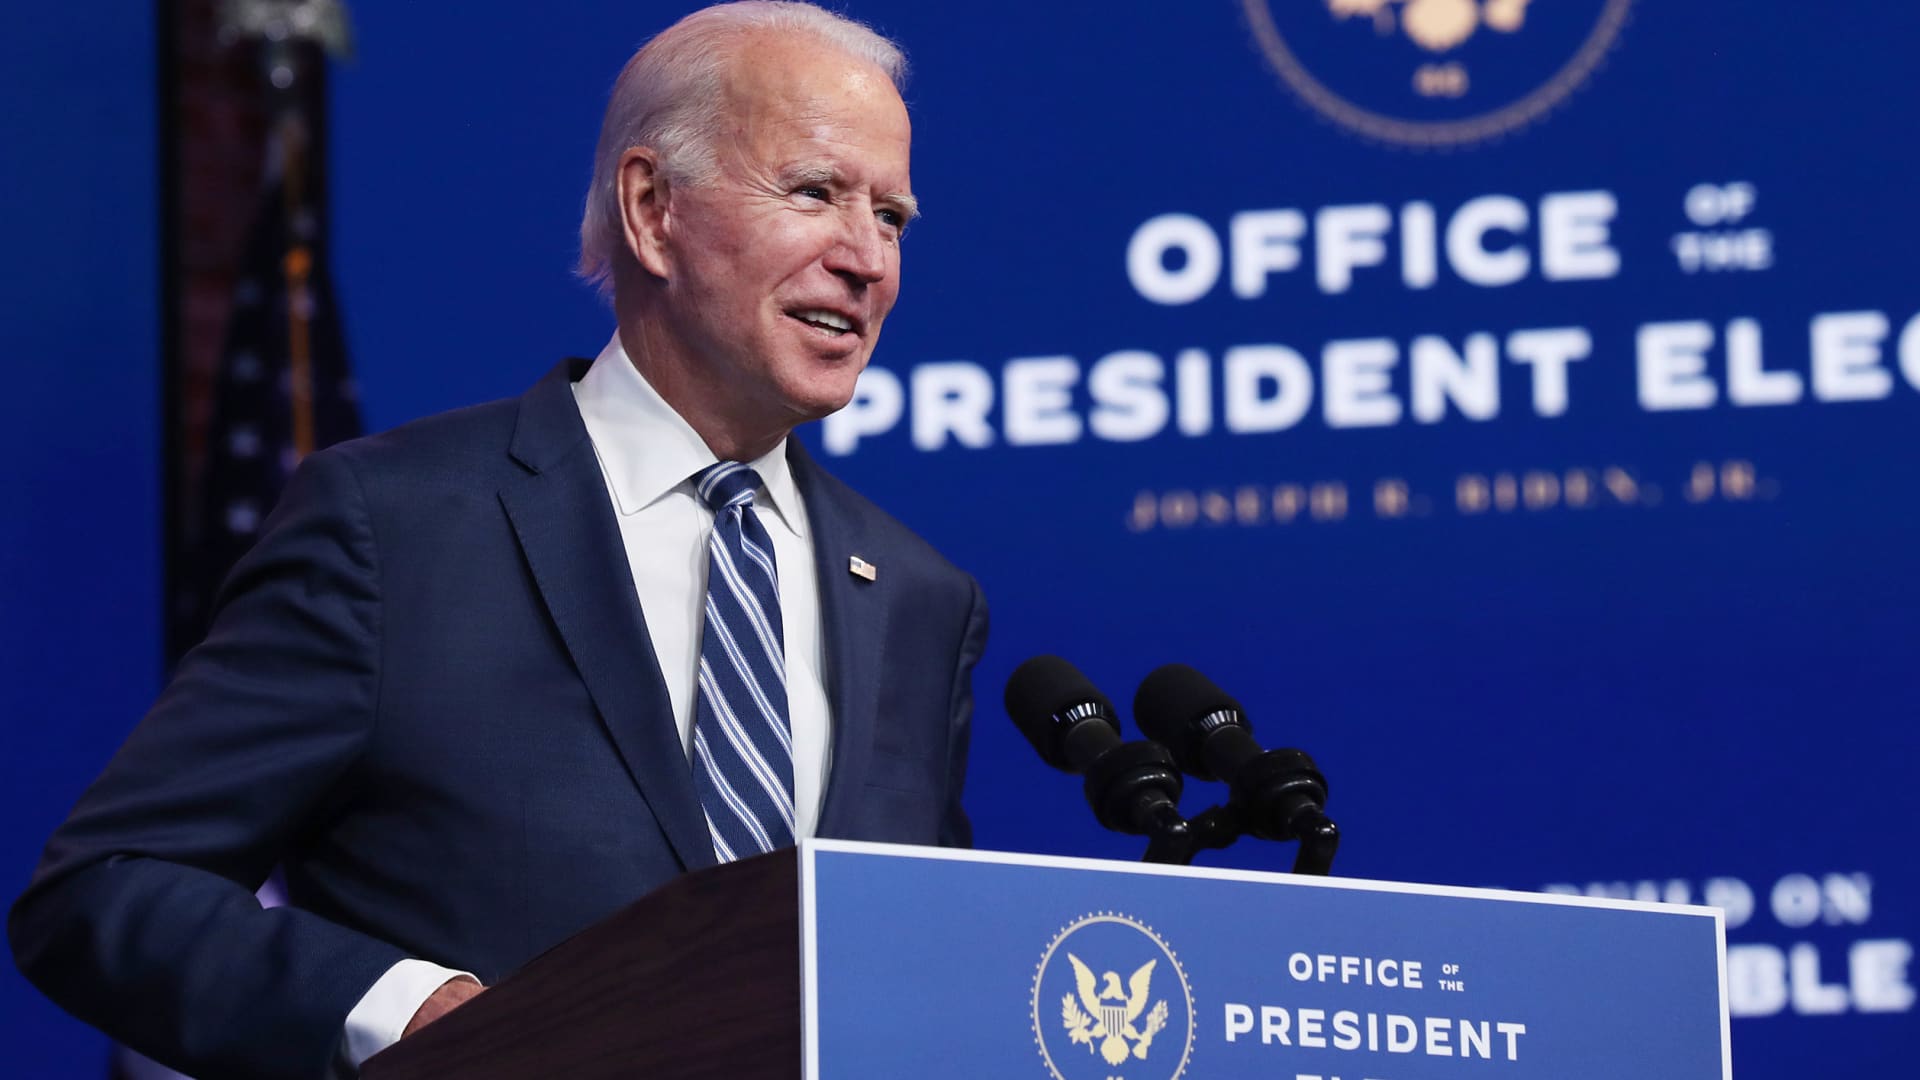 President-elect Joe Biden addresses media about the Trump Administration’s lawsuit to overturn the Affordable Care Act on Nov. 10, 2020 in Wilmington, Delaware.